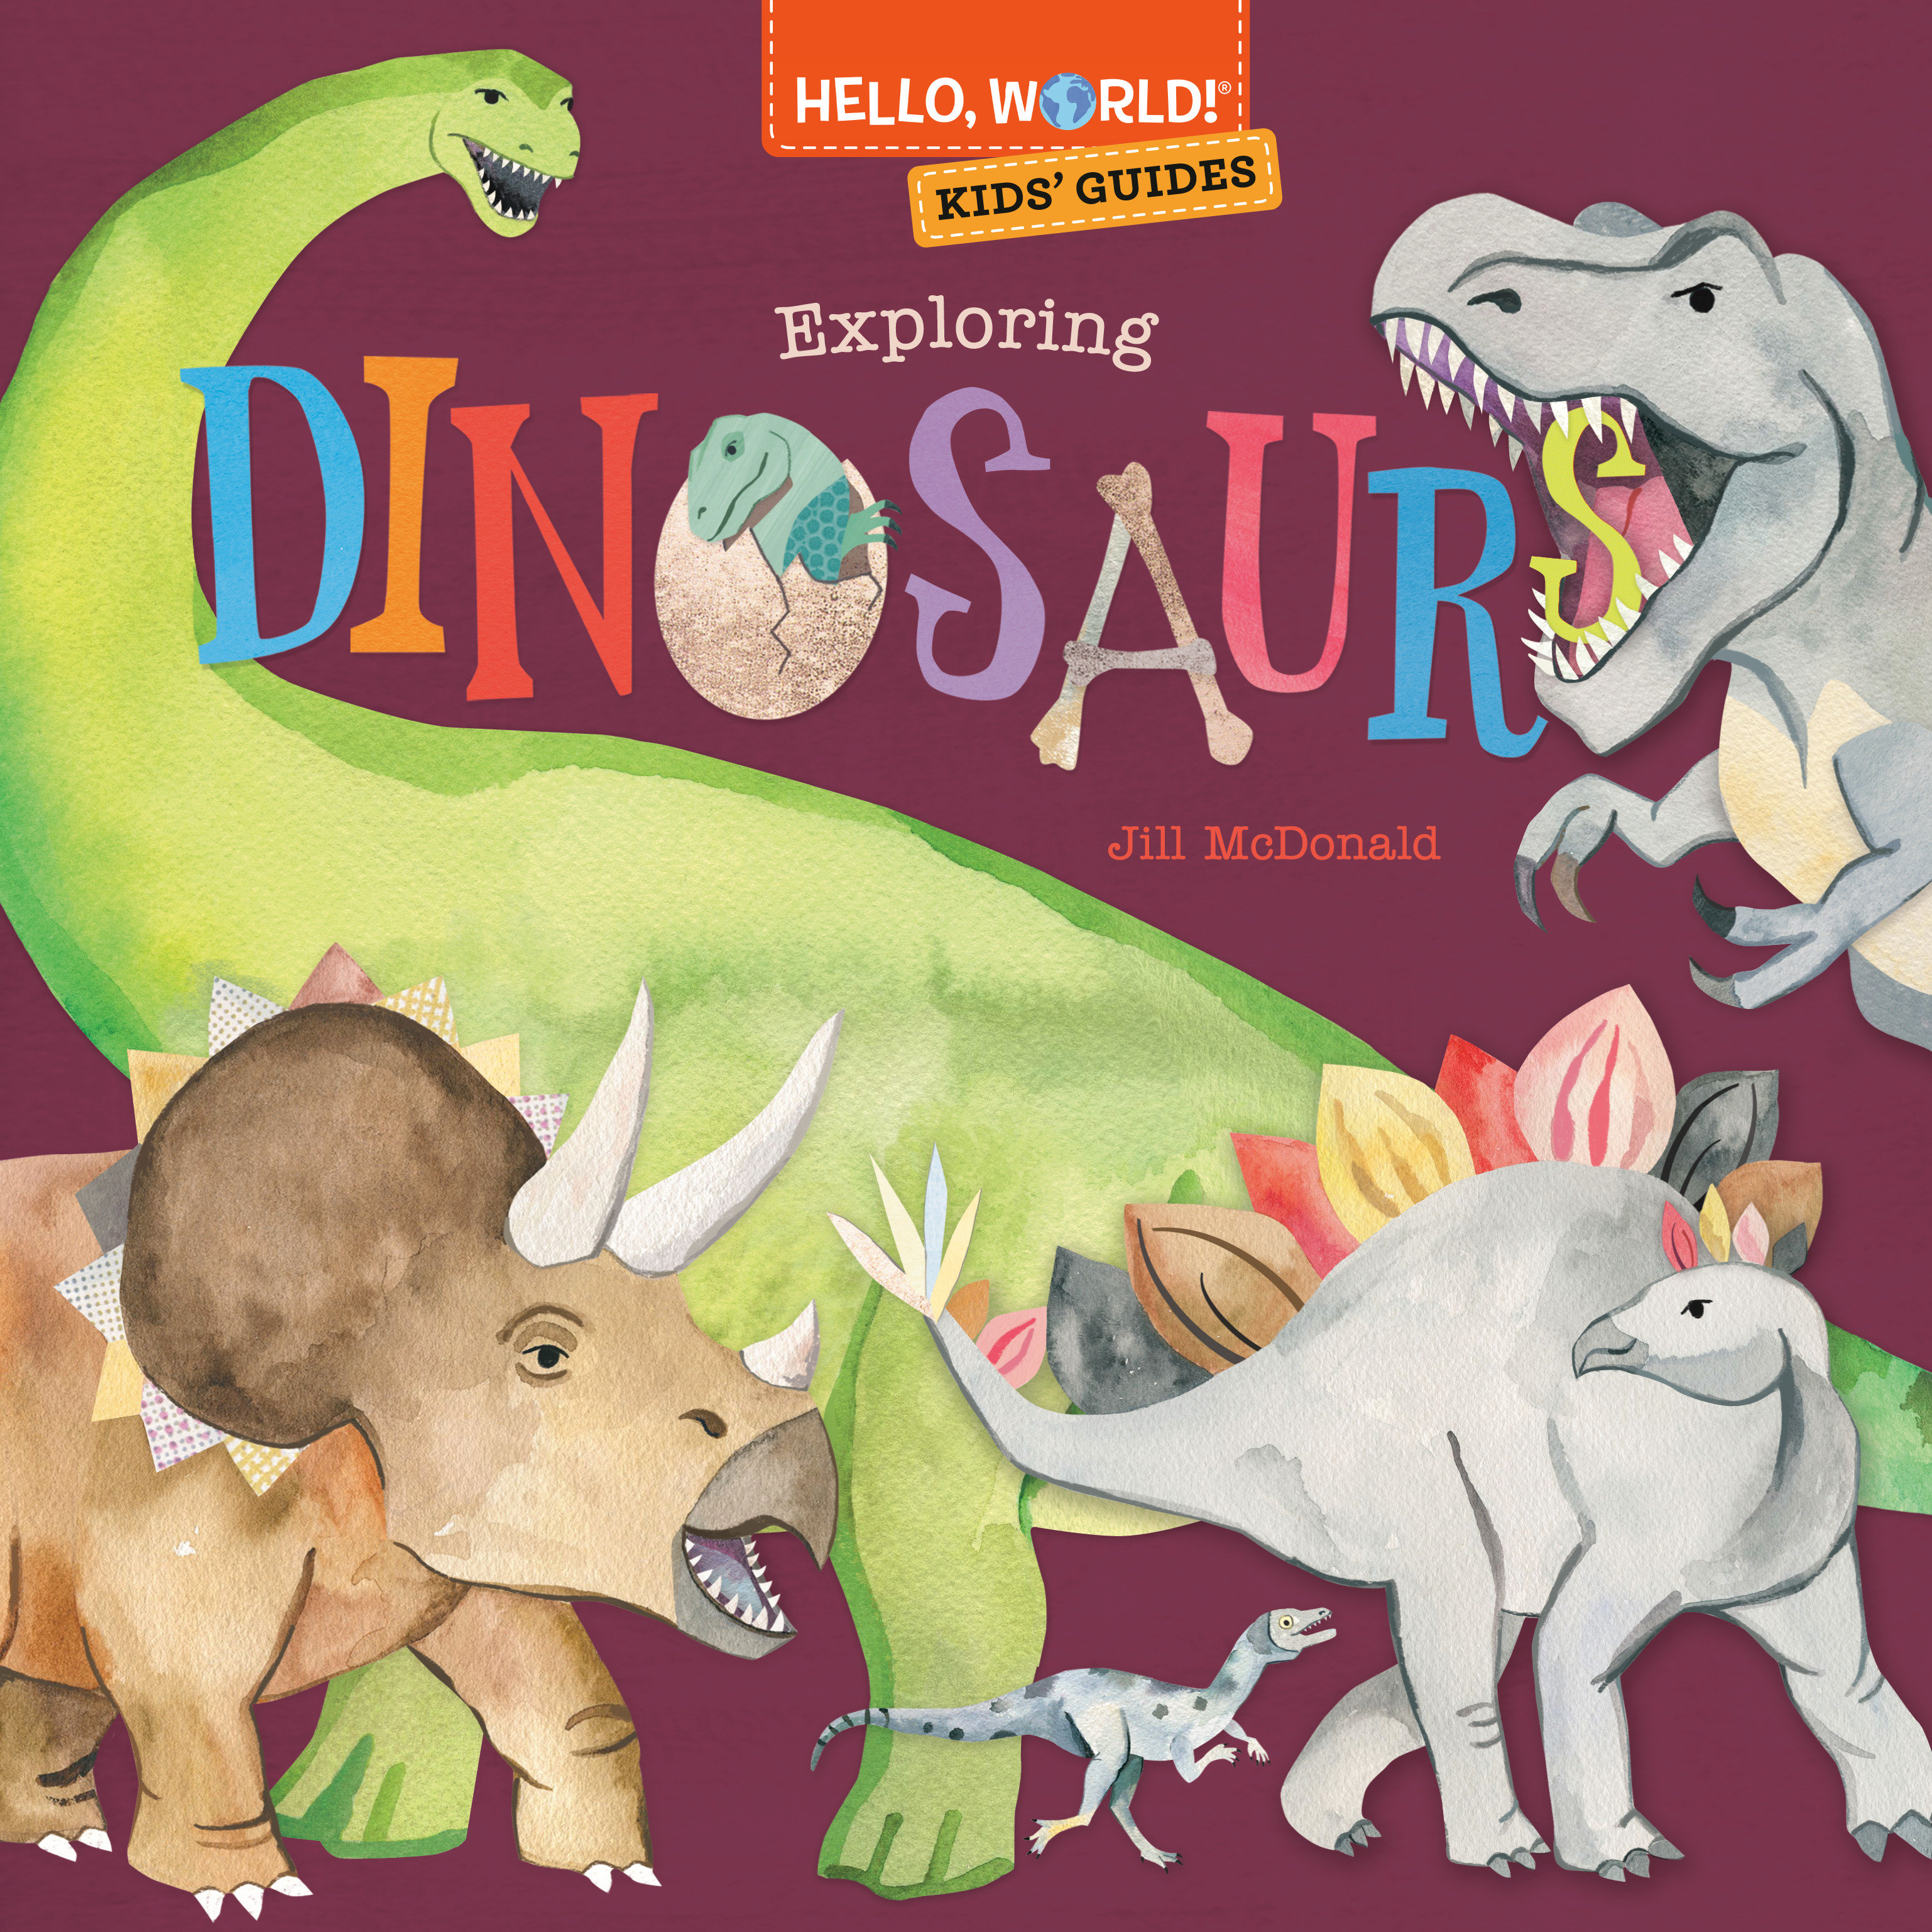 Hello, World! Kids' Guides: Exploring Dinosaurs (Hardcover Book)